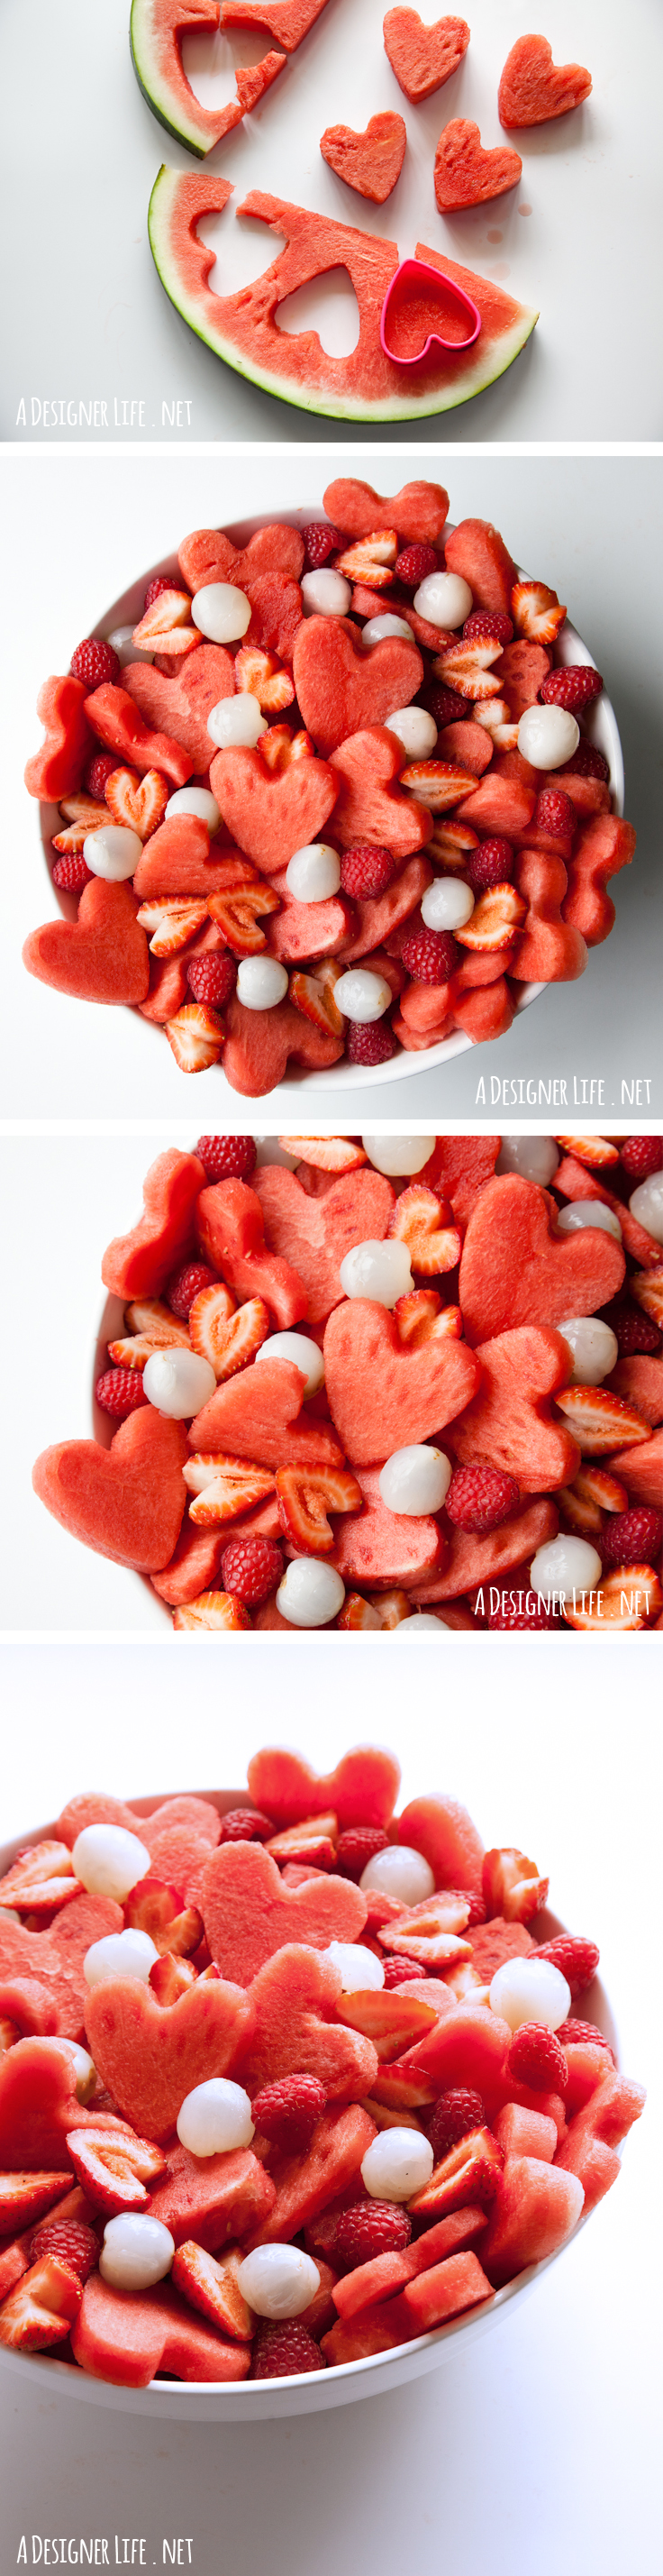 Valentines Day Las Minute Food Ideas: Fruits